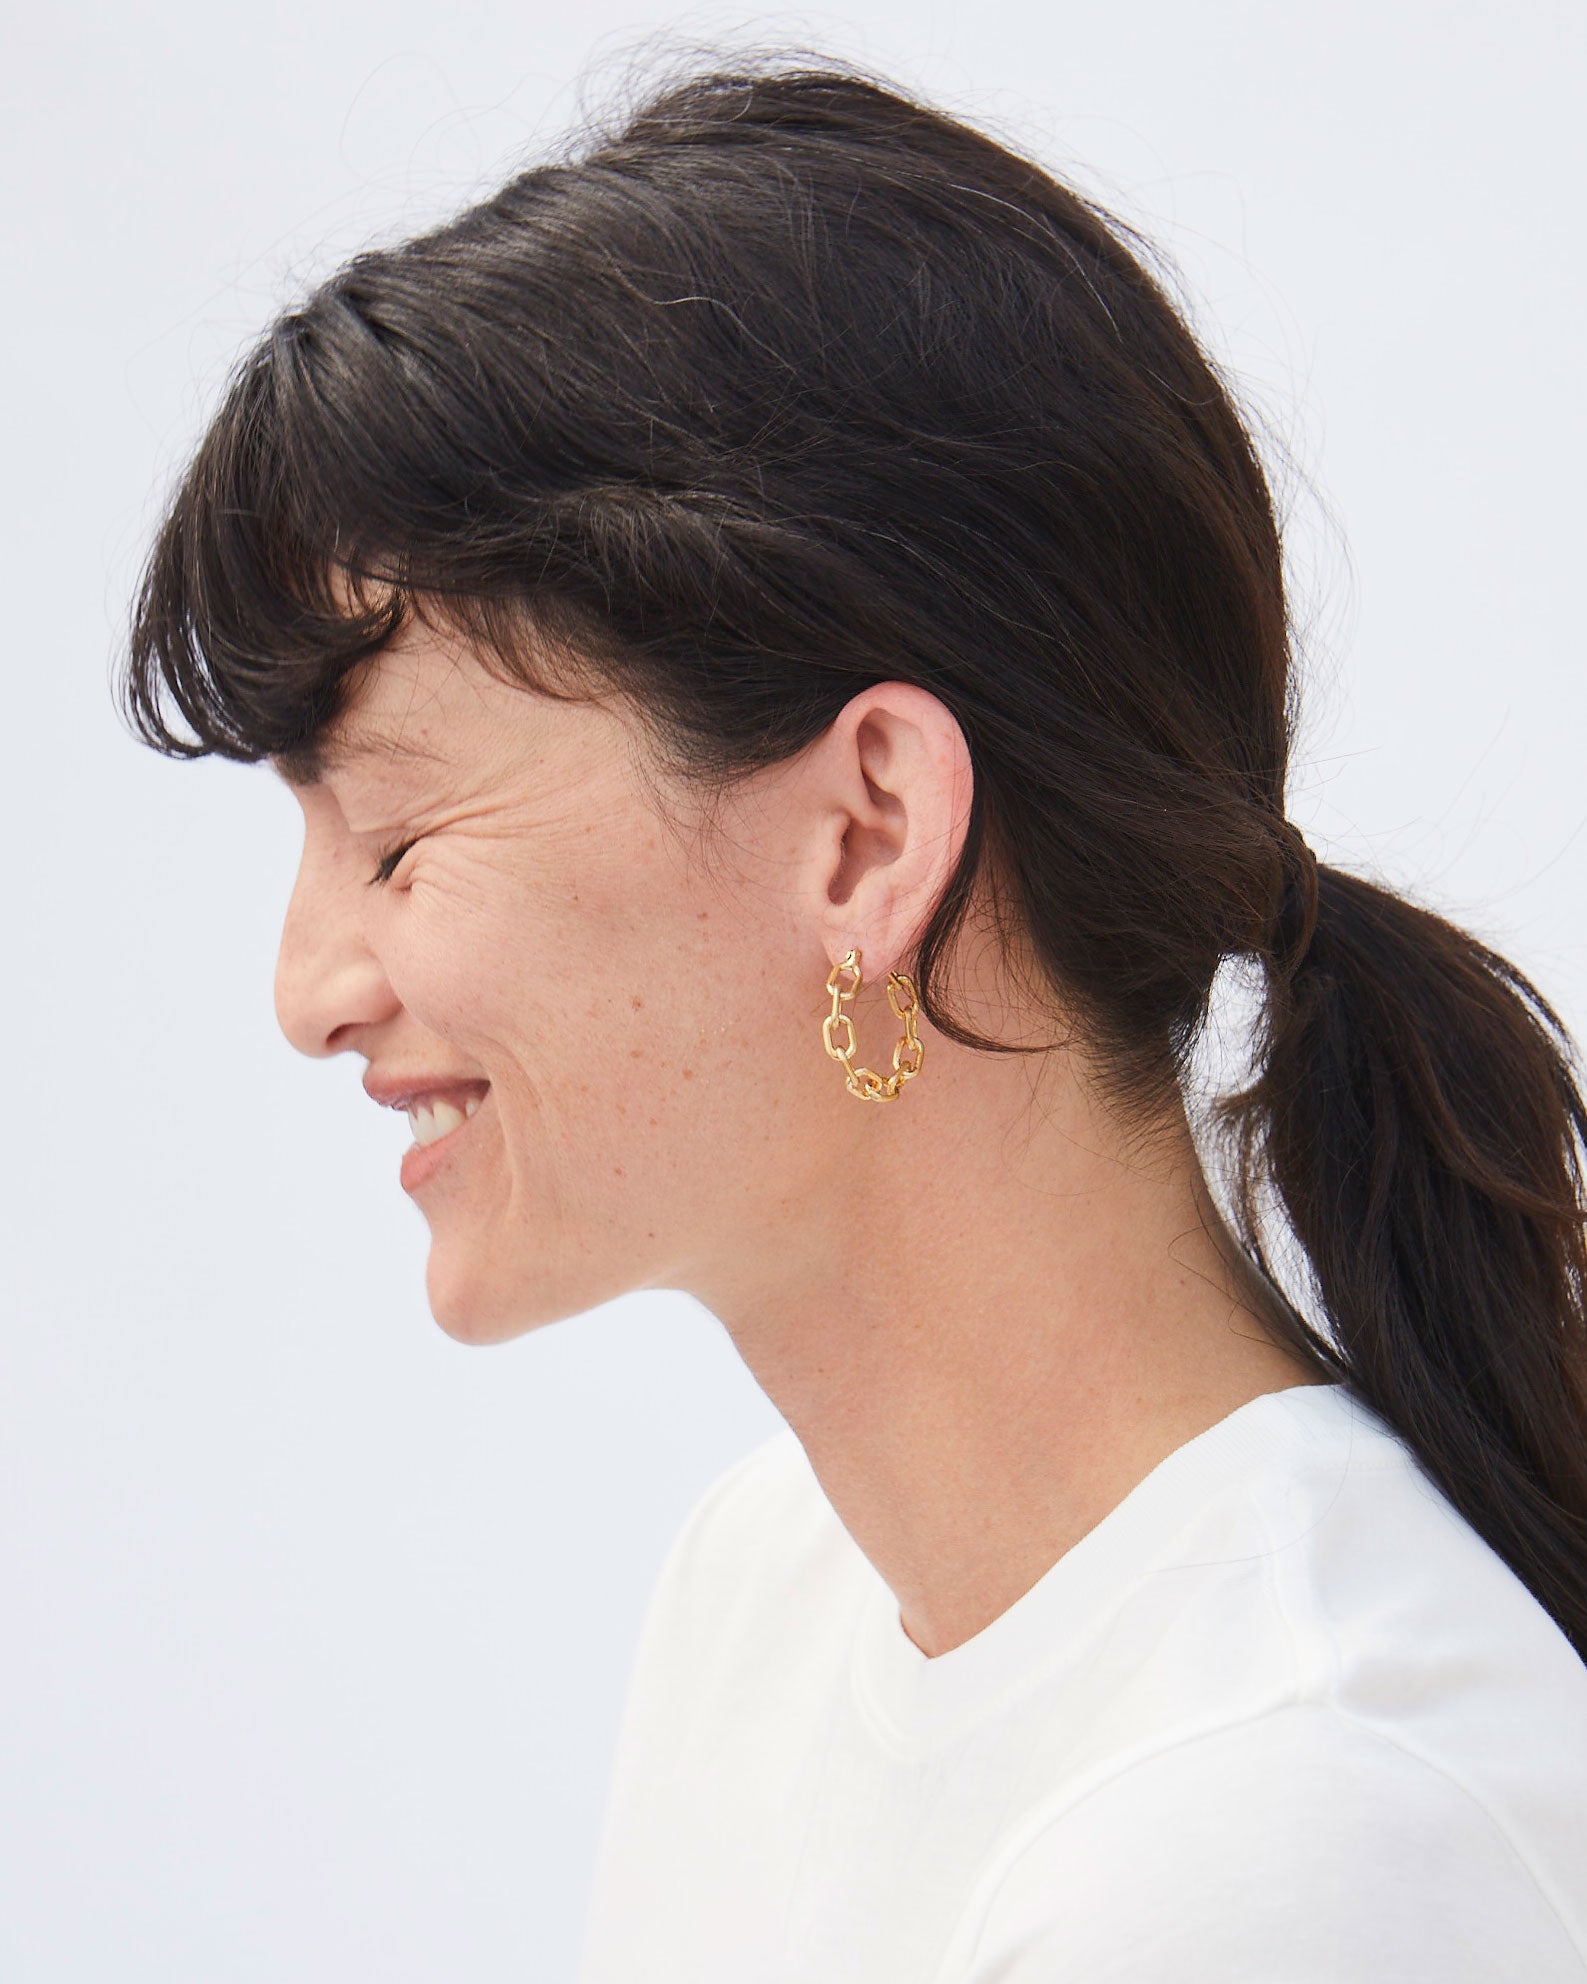 Side View of Danica Smiling ina  Wite T-Shirt and the Vintage Gold Chain Hoop Earrings with her Hair in a Ponytail